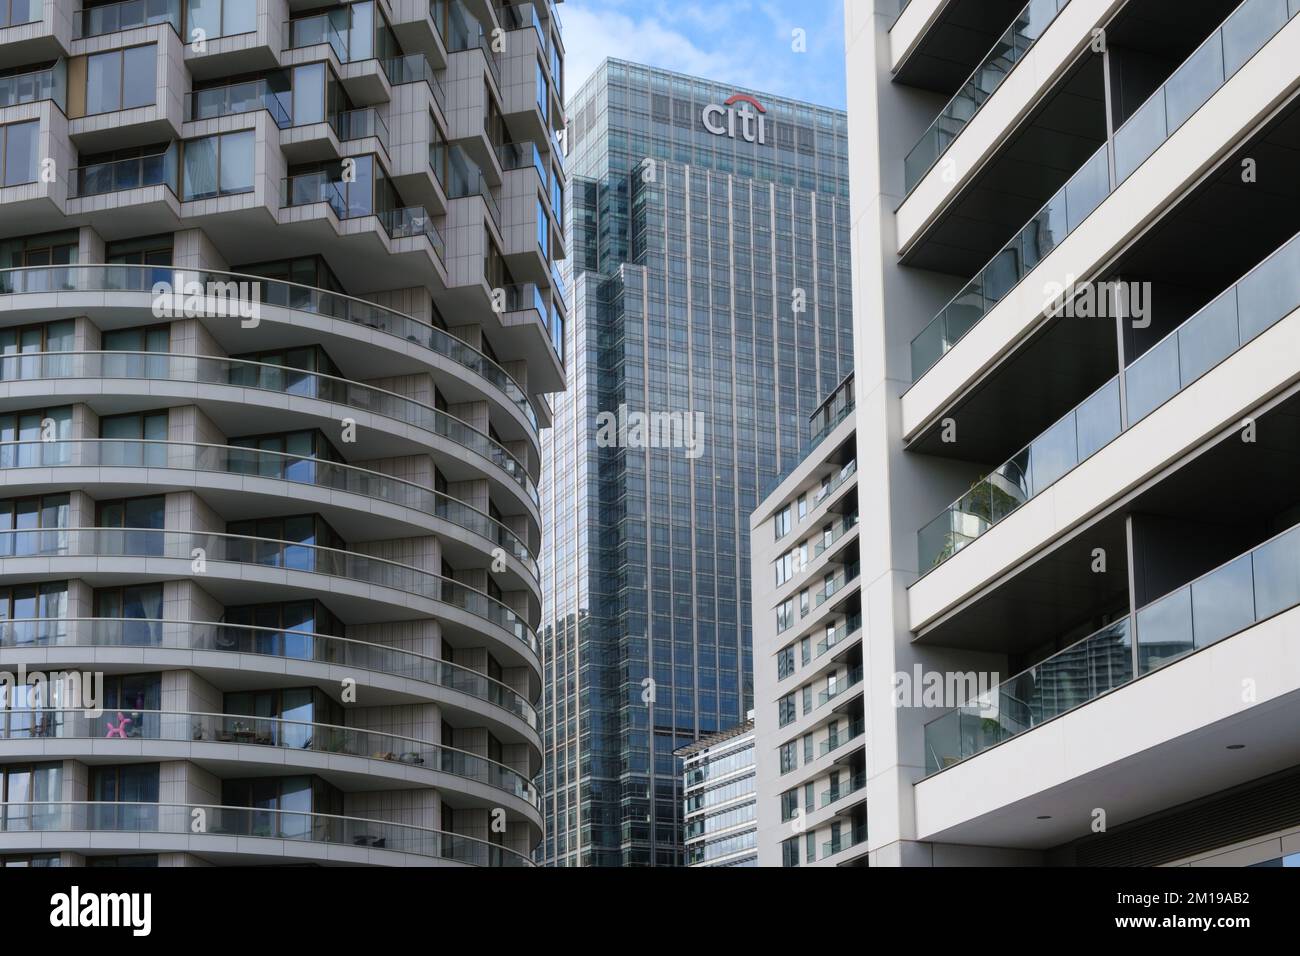 Detail of high-rise residential & commercial buildings including Citigroup Centre. Curved balconies. Canary Wharf, London, England. Stock Photo